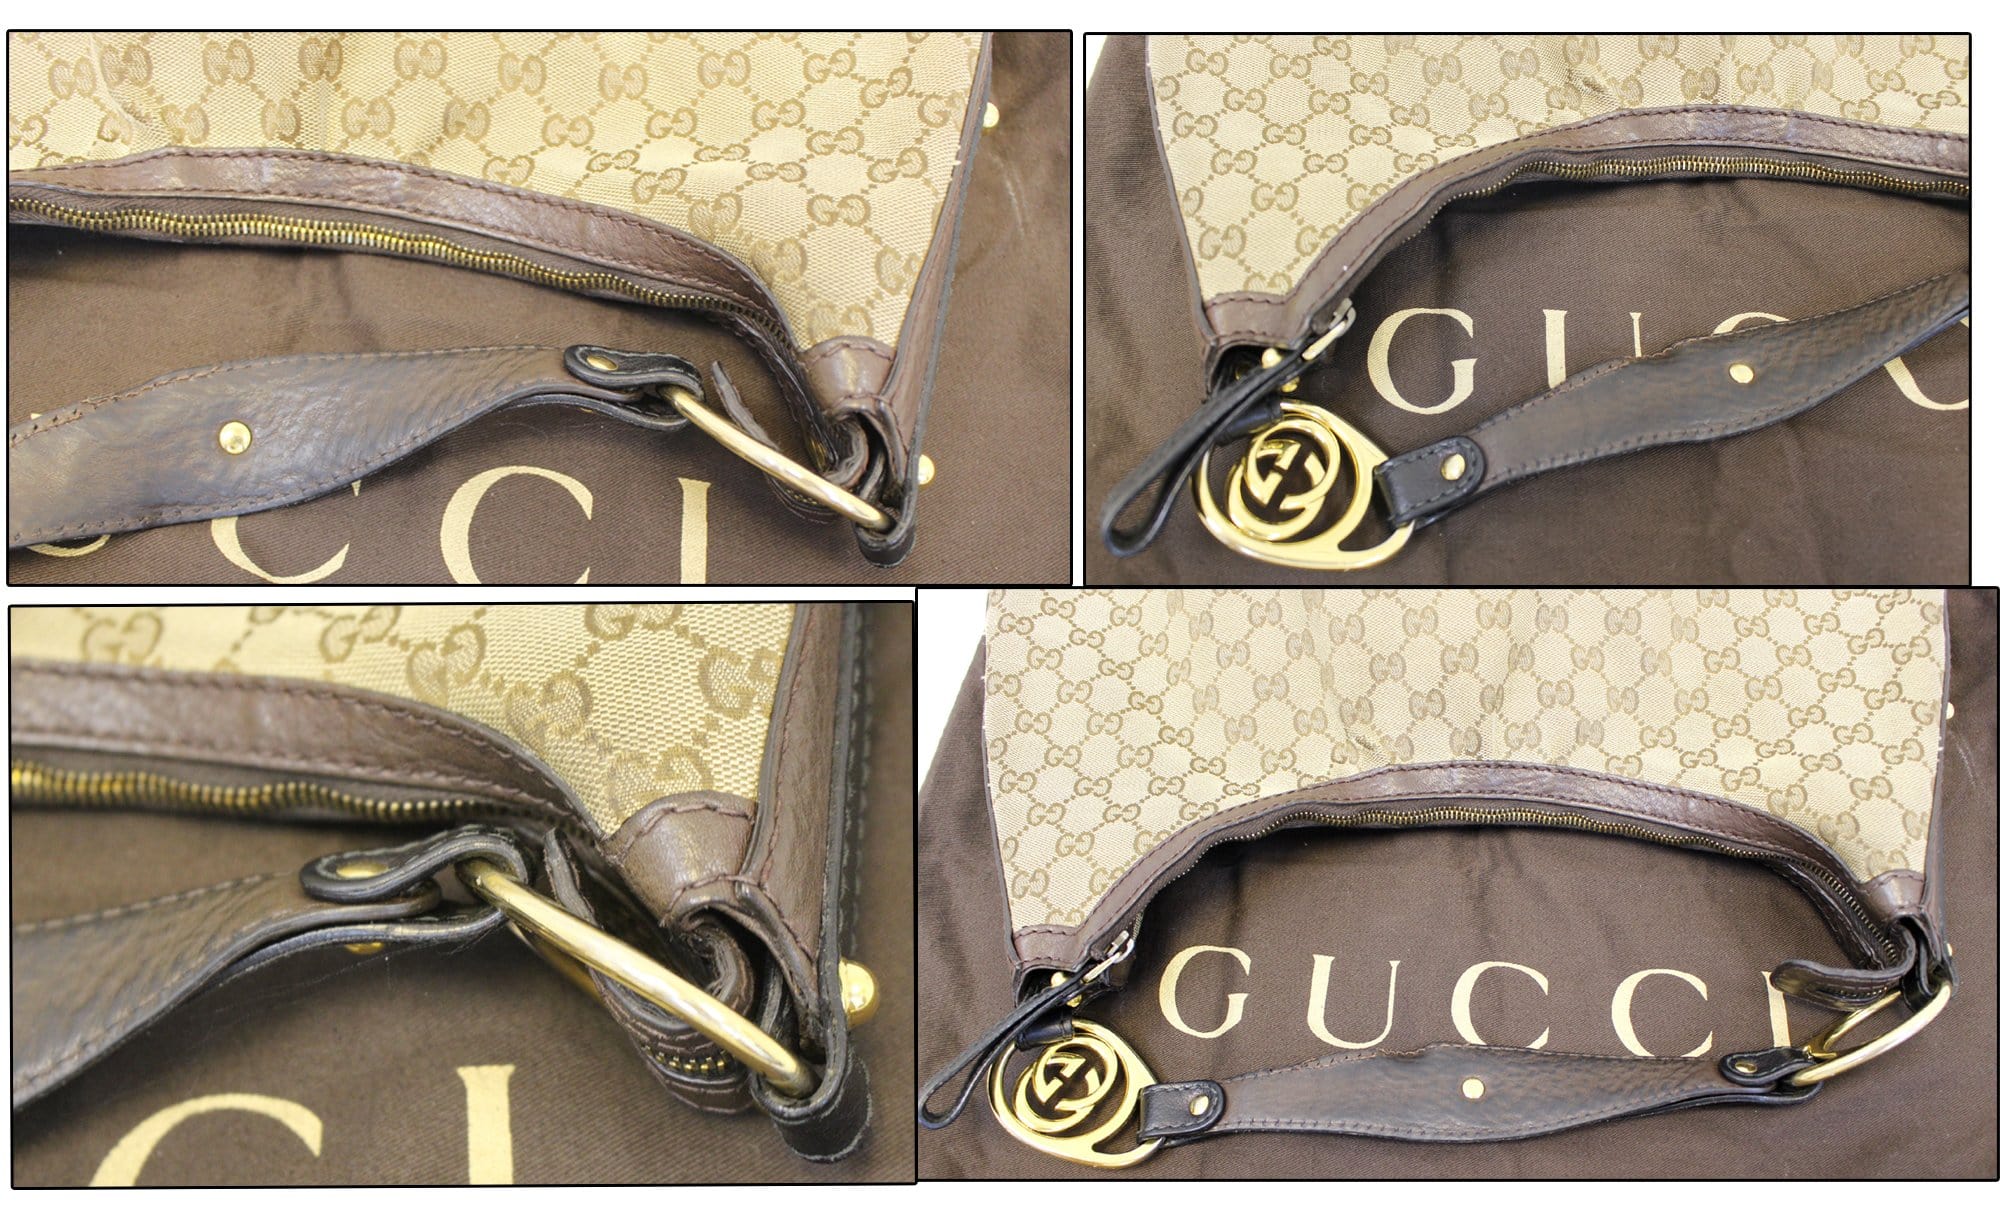 Gucci Messenger Bag With Interlocking G In Beige And Ebony